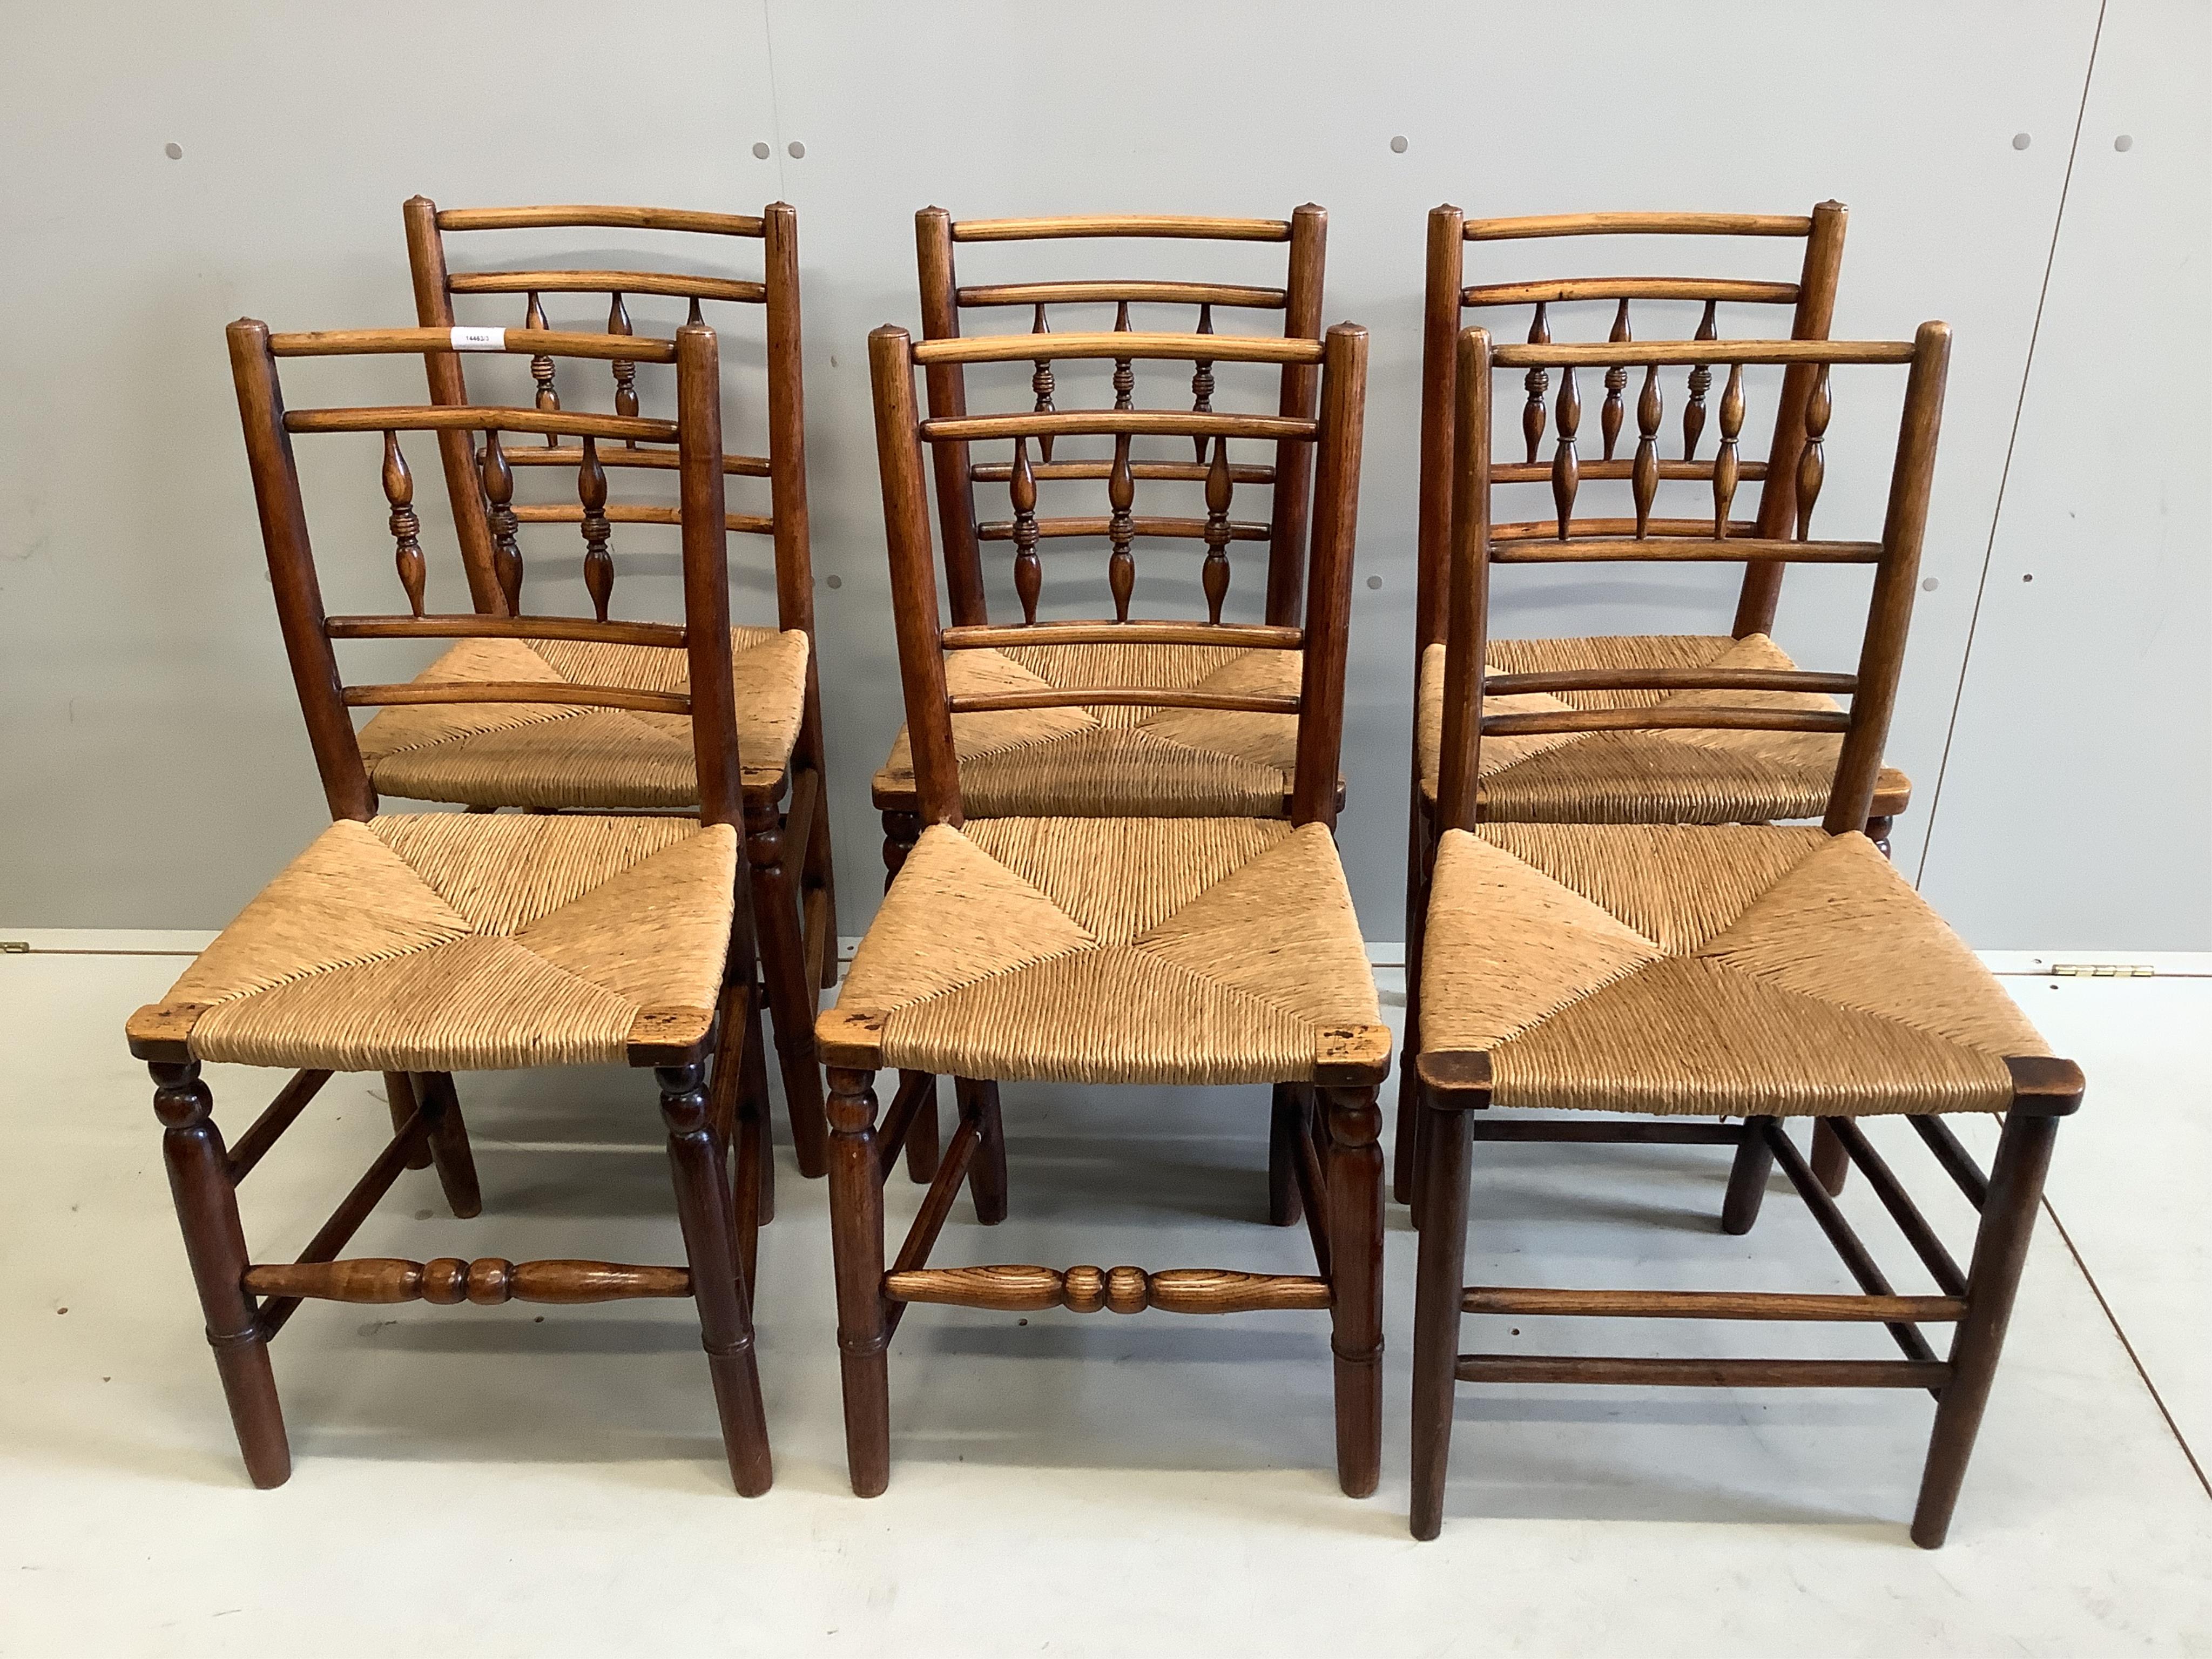 Six early 19th century (five plus one) ash rush seat chairs, width 41cm, depth 34cm, height 86cm. Condition - good